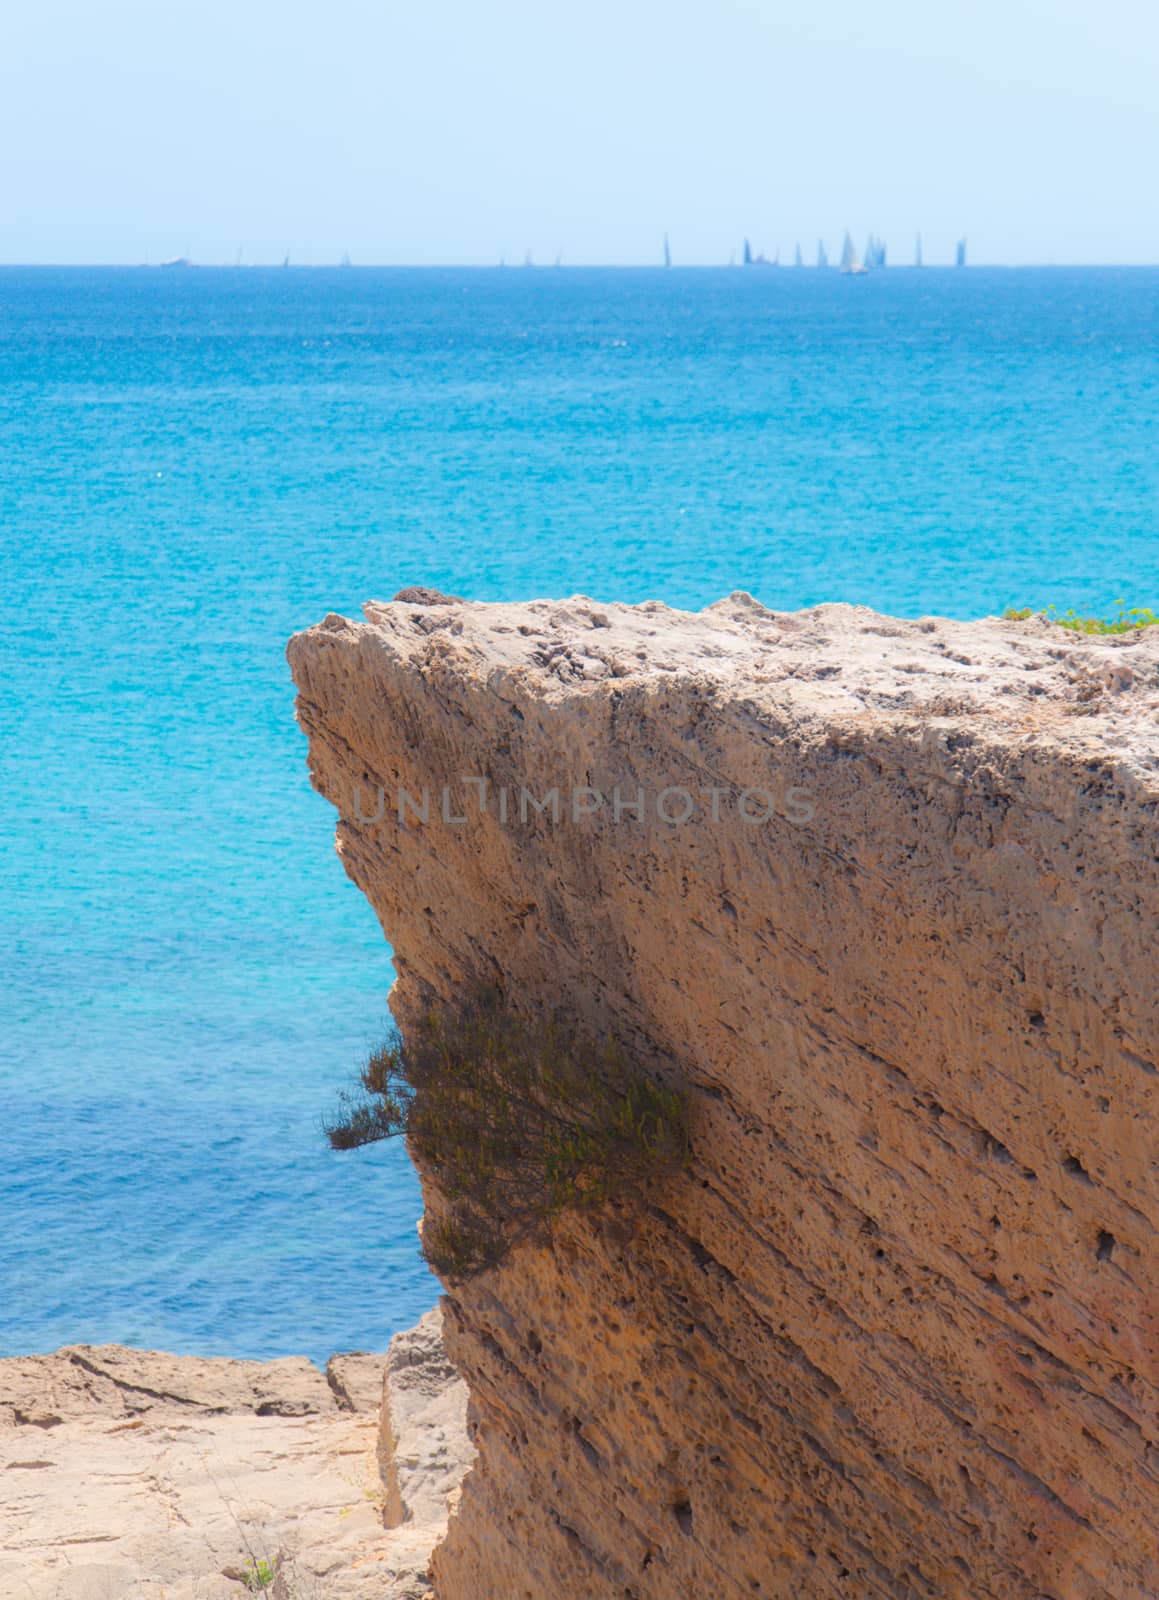 Azure water and yellow limestone cliff in Palma bay by ArtesiaWells